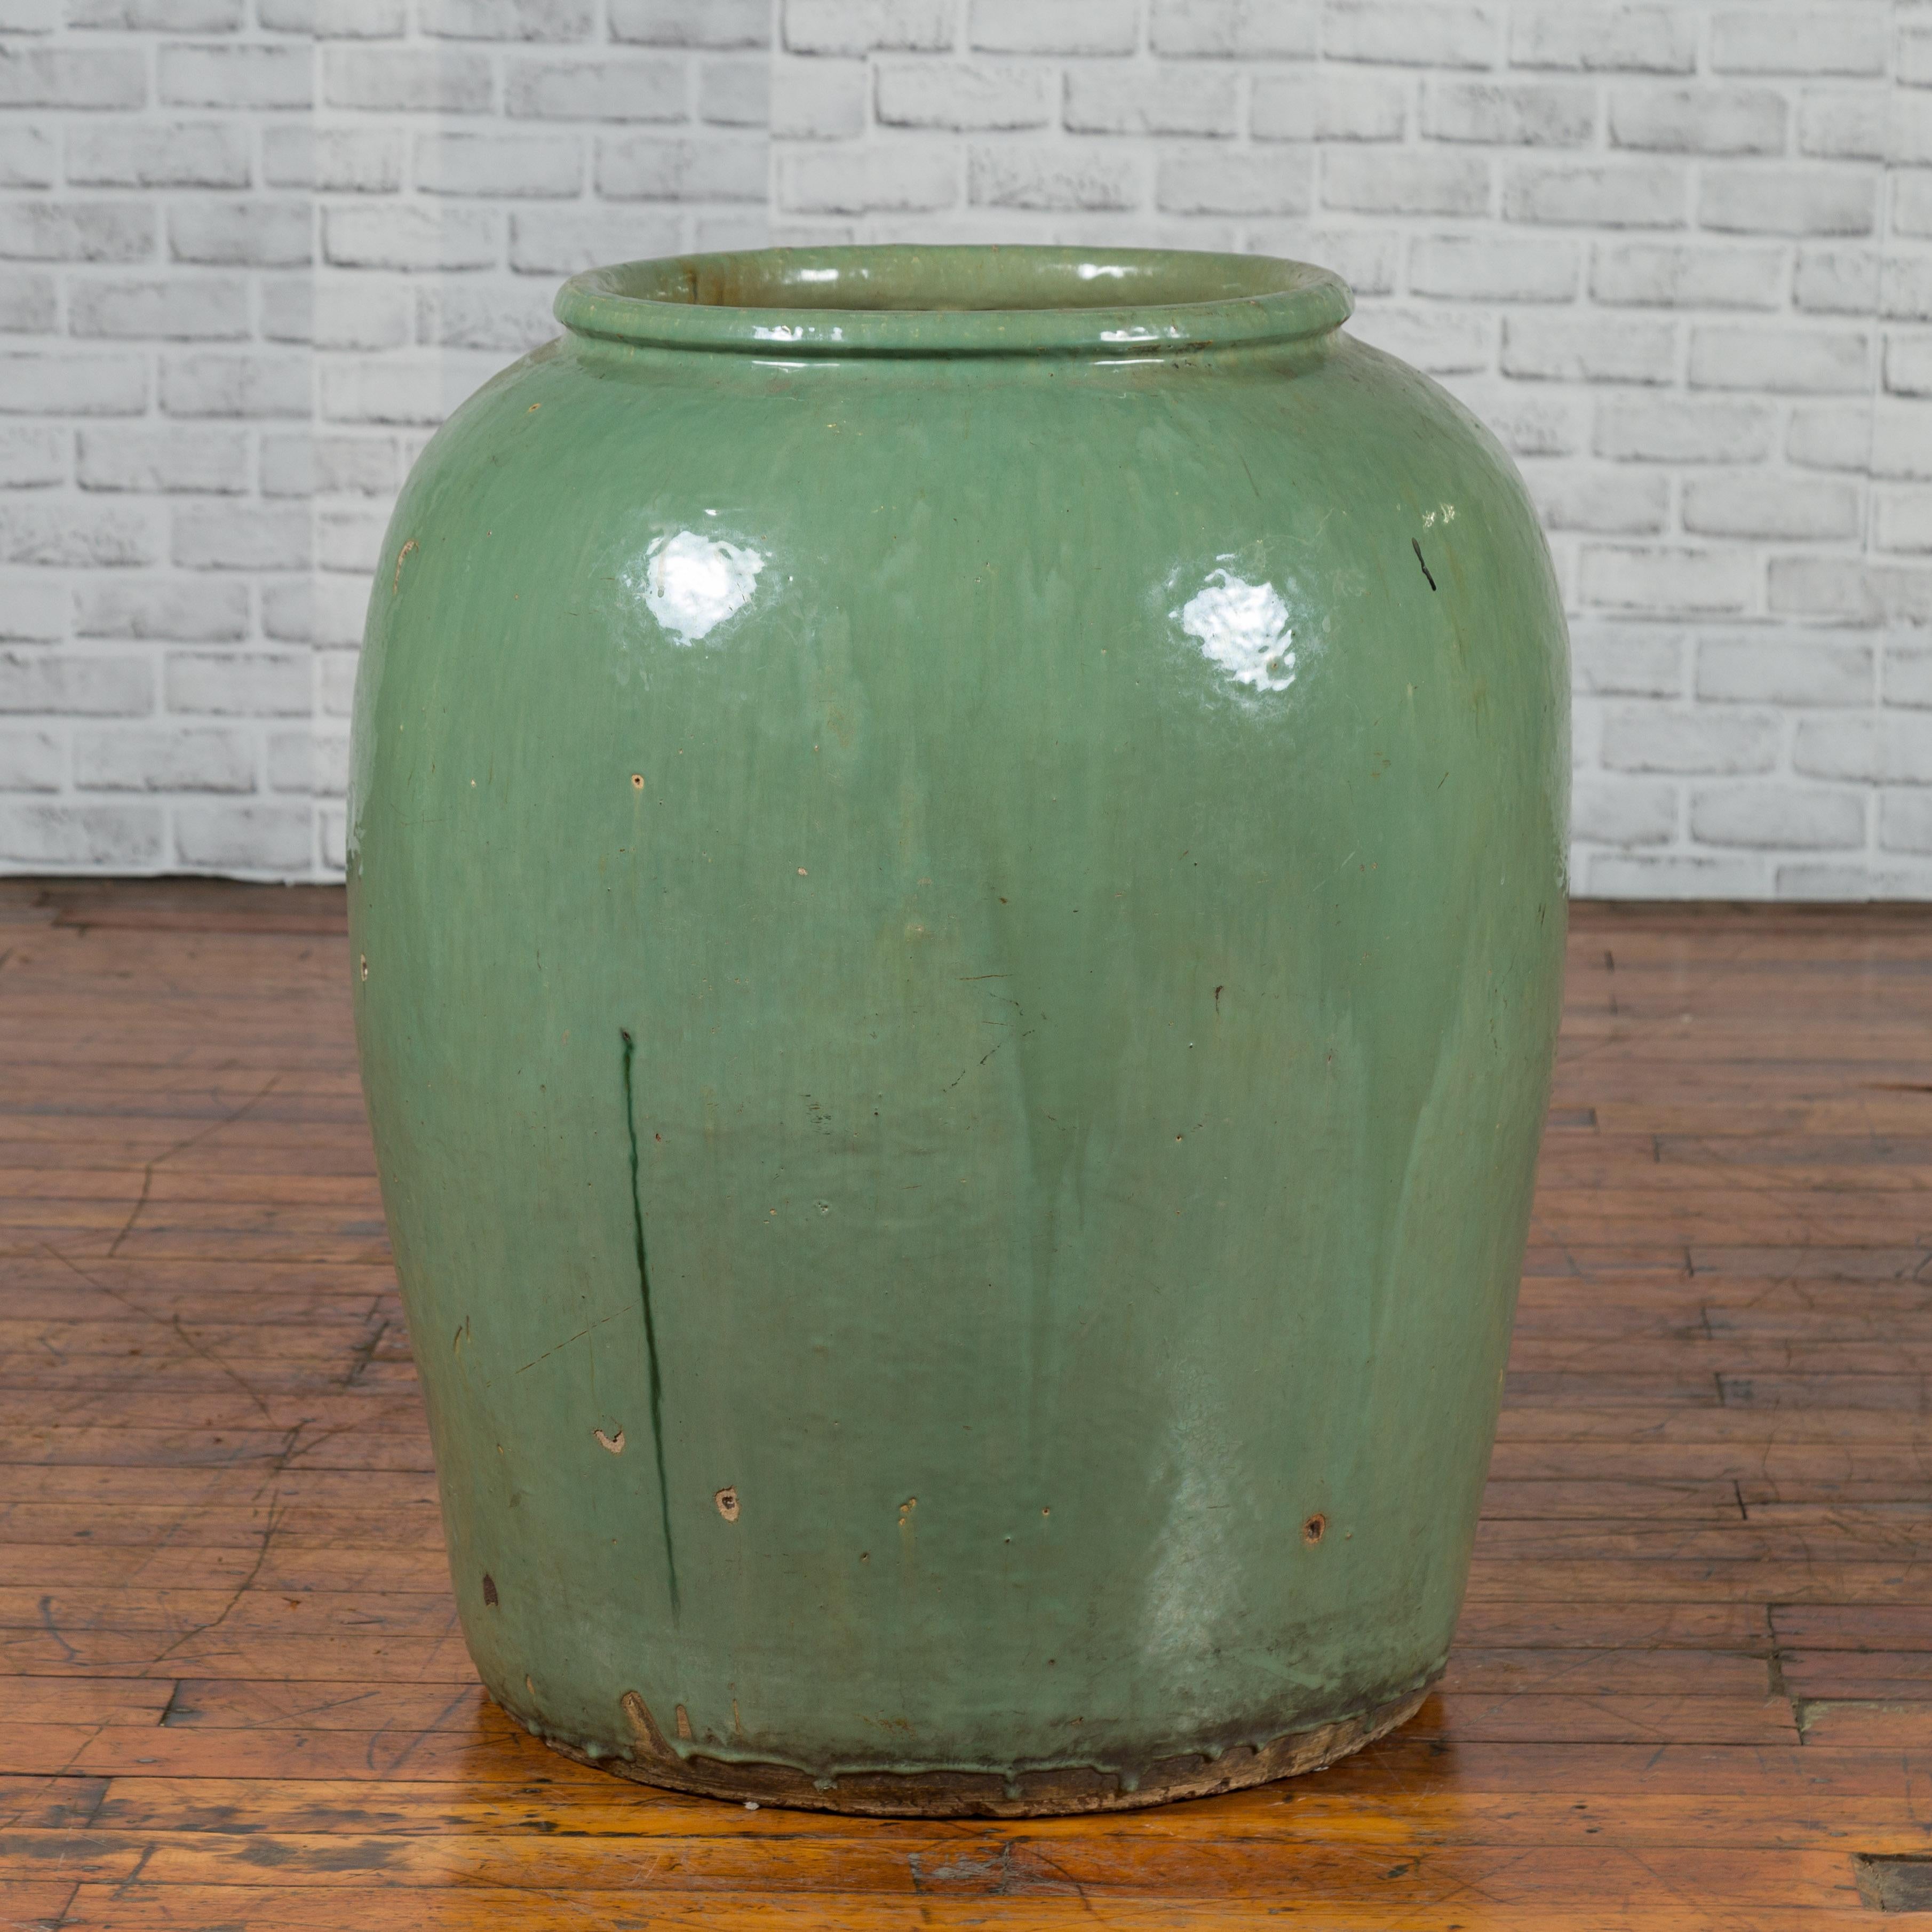 A large Chinese Qing dynasty green glazed storage jug from the 19th century with dripping touches. Created in China during the Qing dynasty period, this green jug captures our attention with its large proportions and nicely distressed patina.